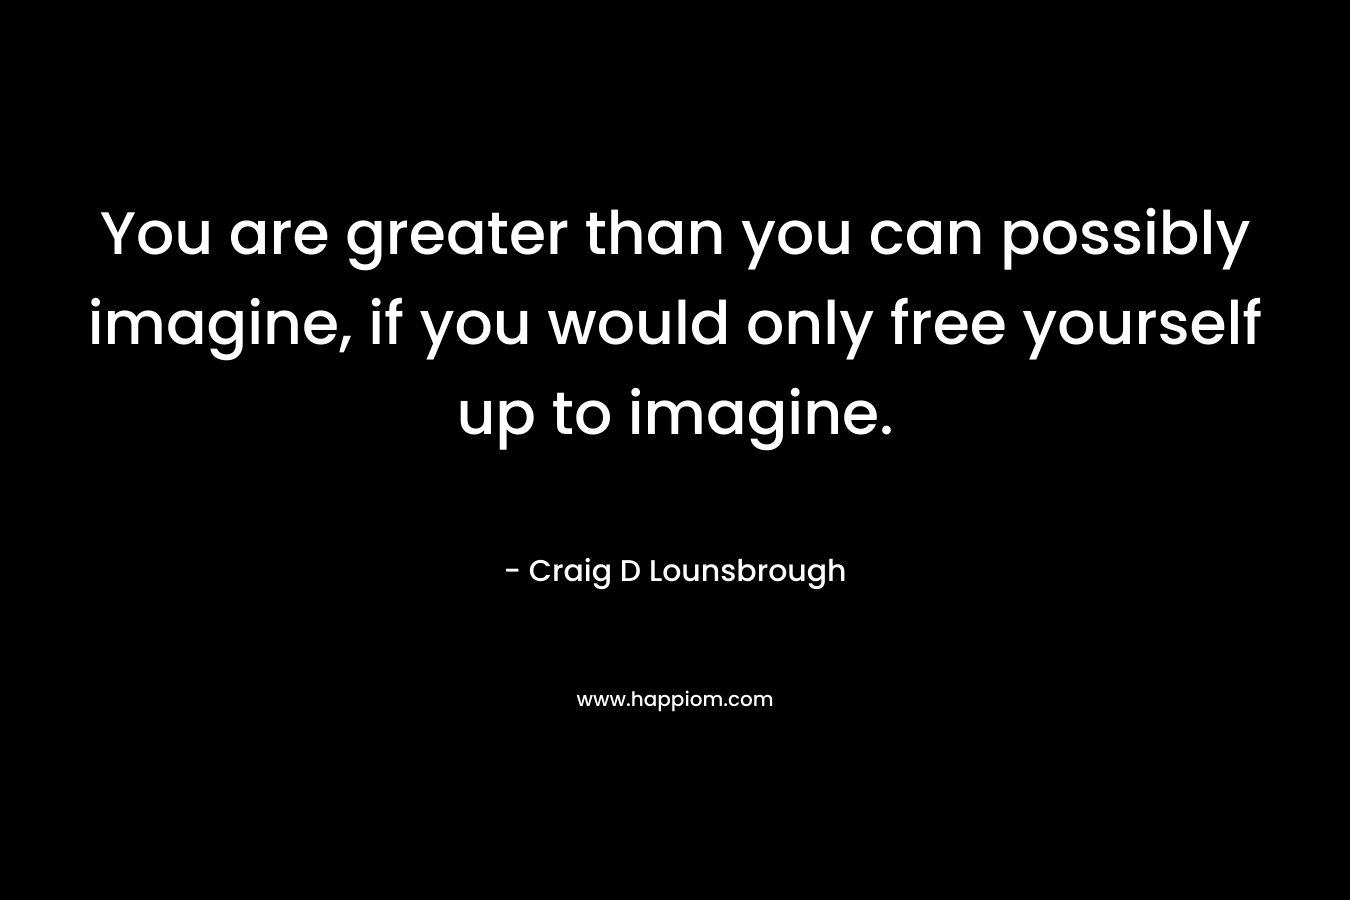 You are greater than you can possibly imagine, if you would only free yourself up to imagine.